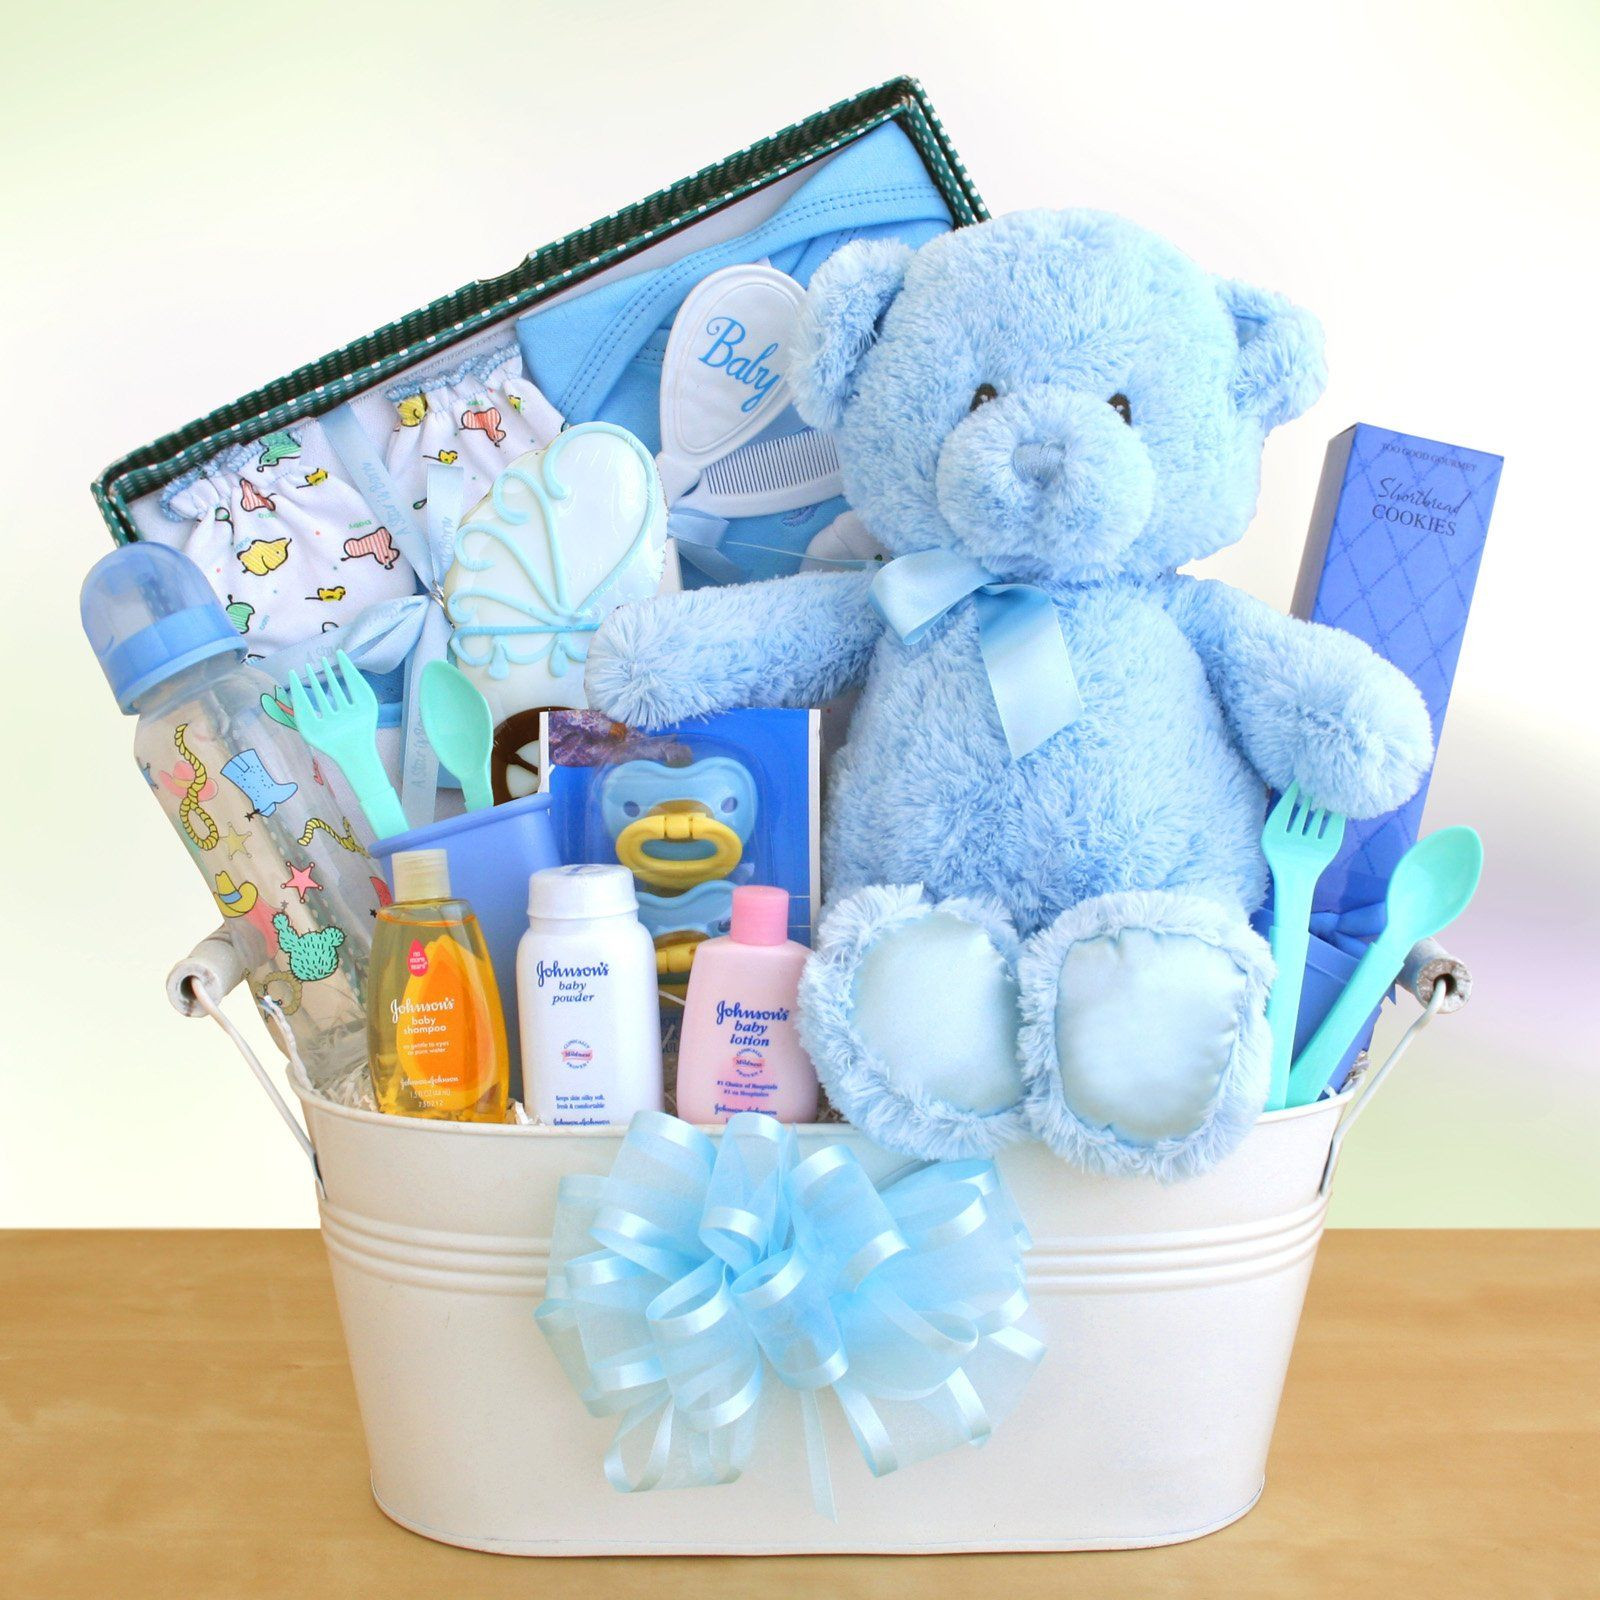 Diy Baby Boy Shower Gift Ideas
 Have to have it New Arrival Baby Boy Gift Basket $78 99